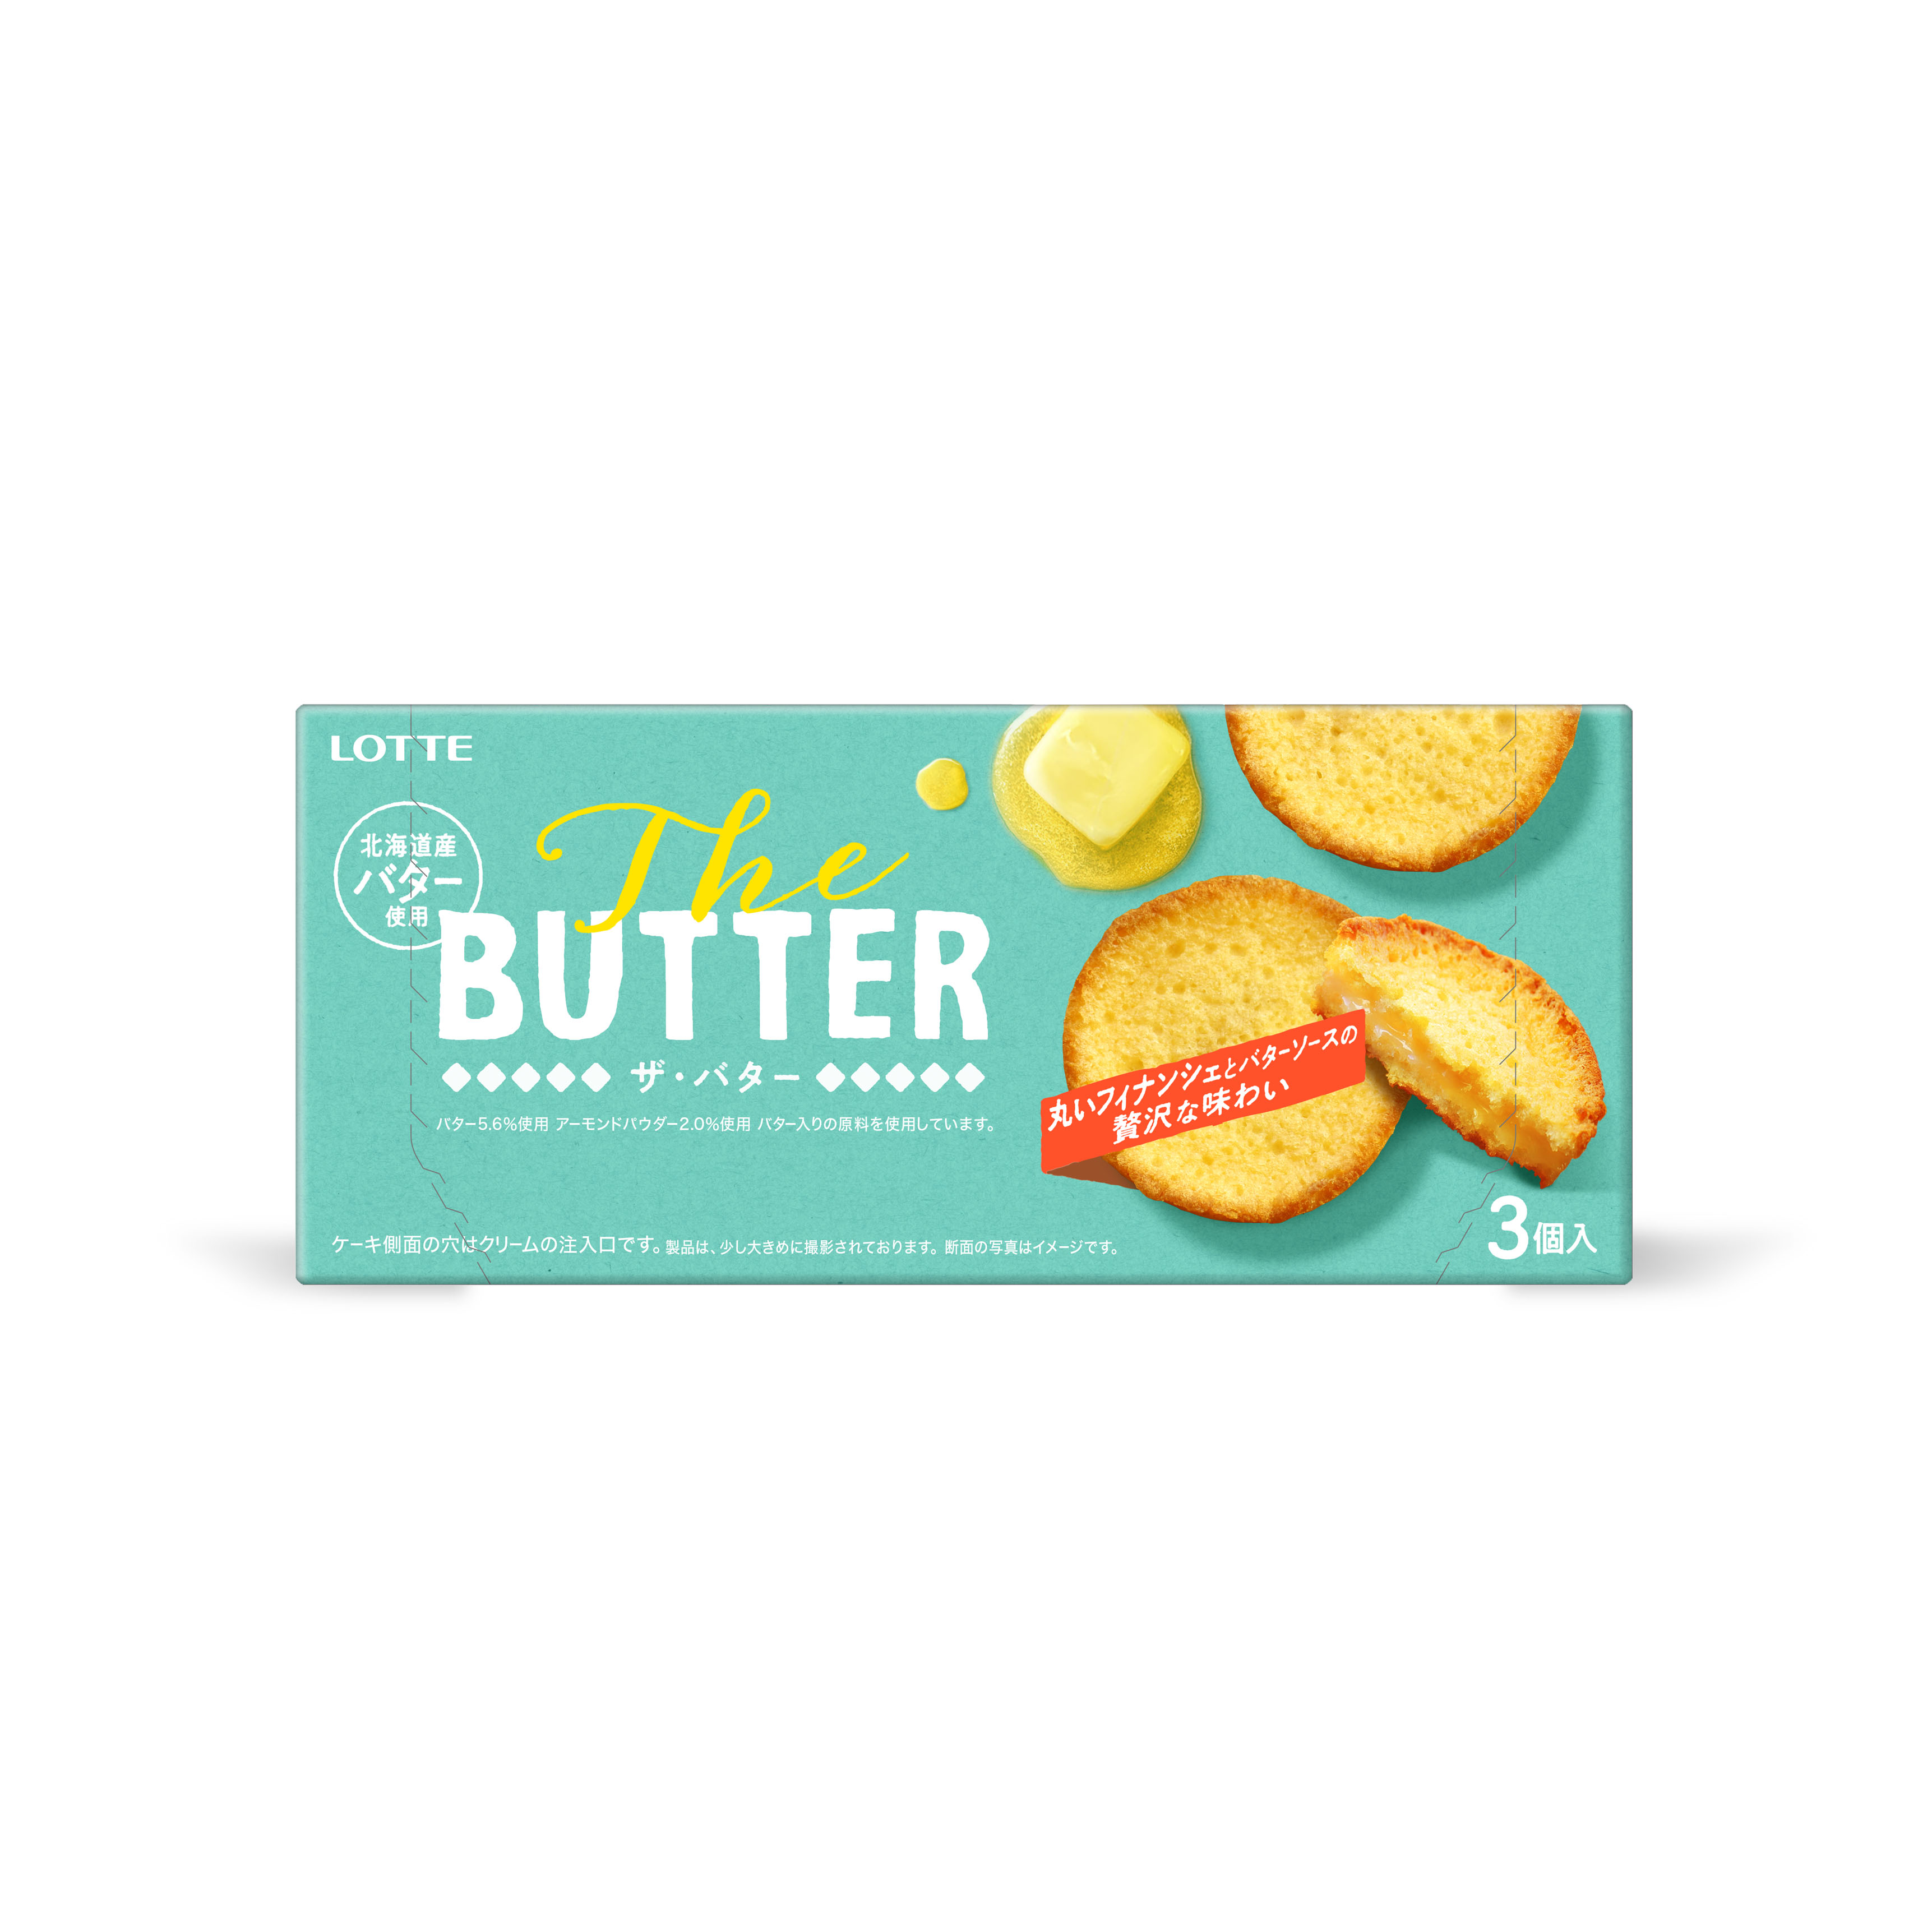 The BUTTERのデザイン